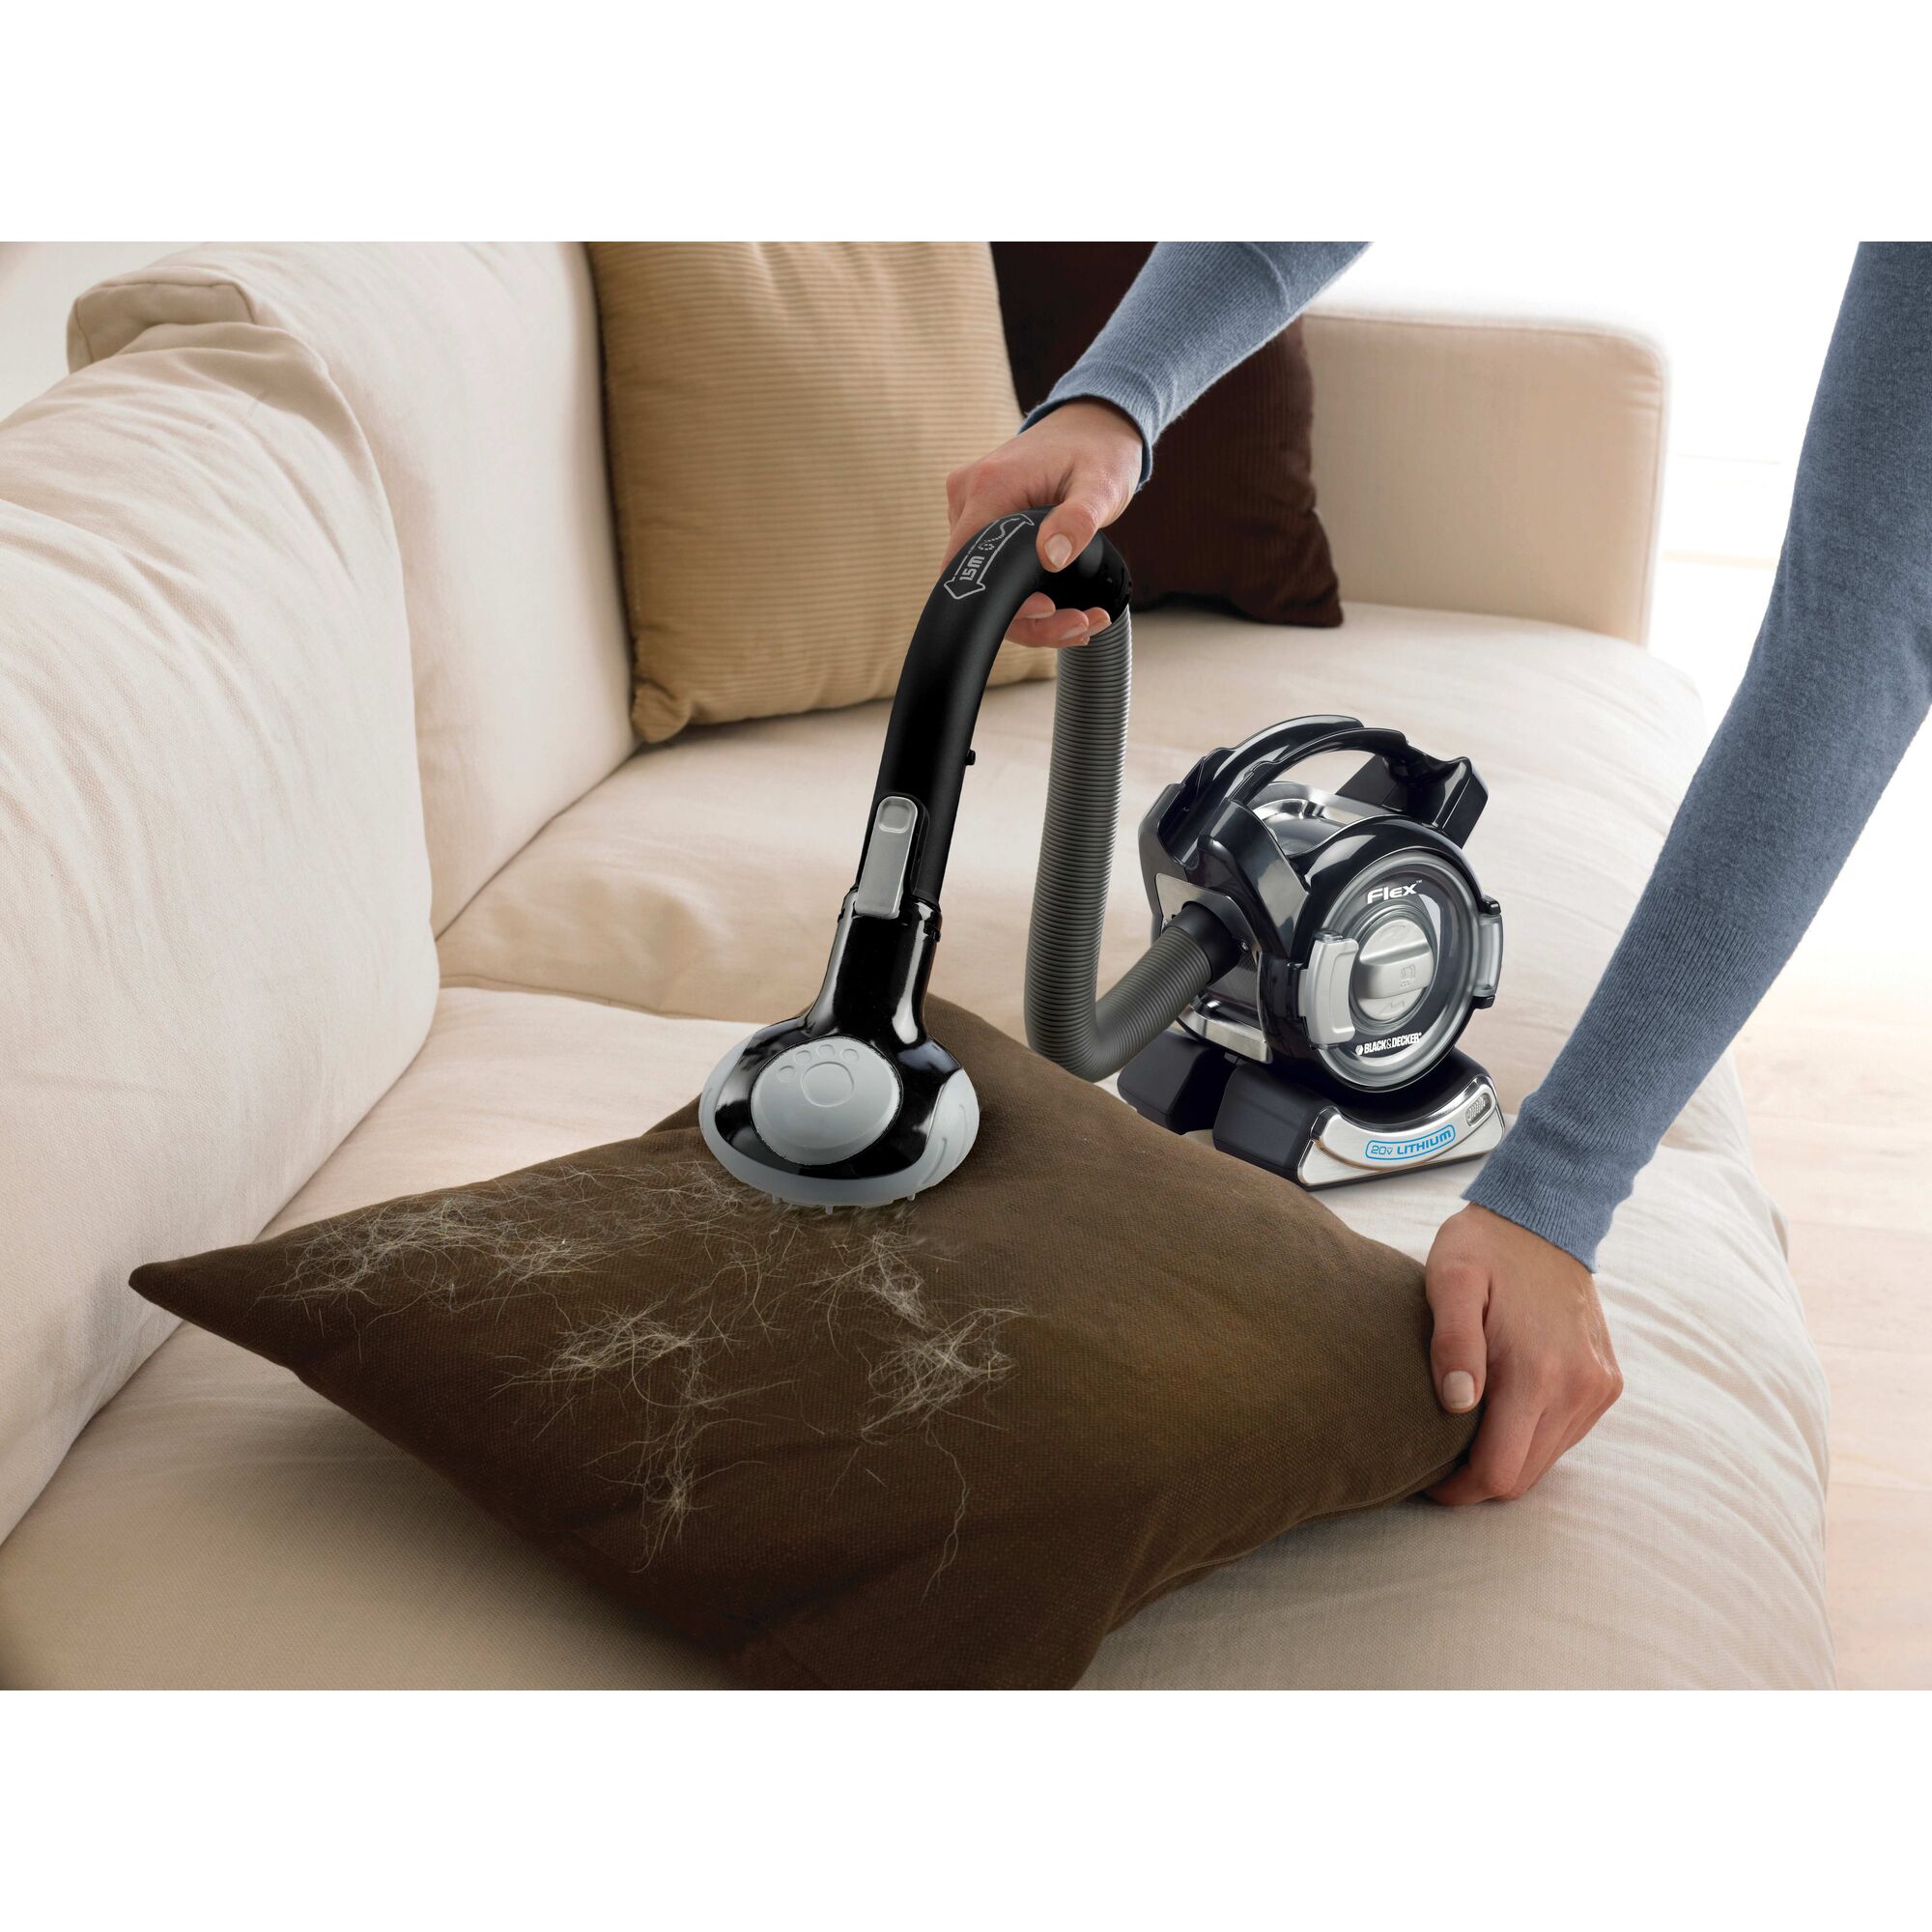 Dustbuster flex cordless hand vacuum with floor head plus pet hair brush being used by a person.